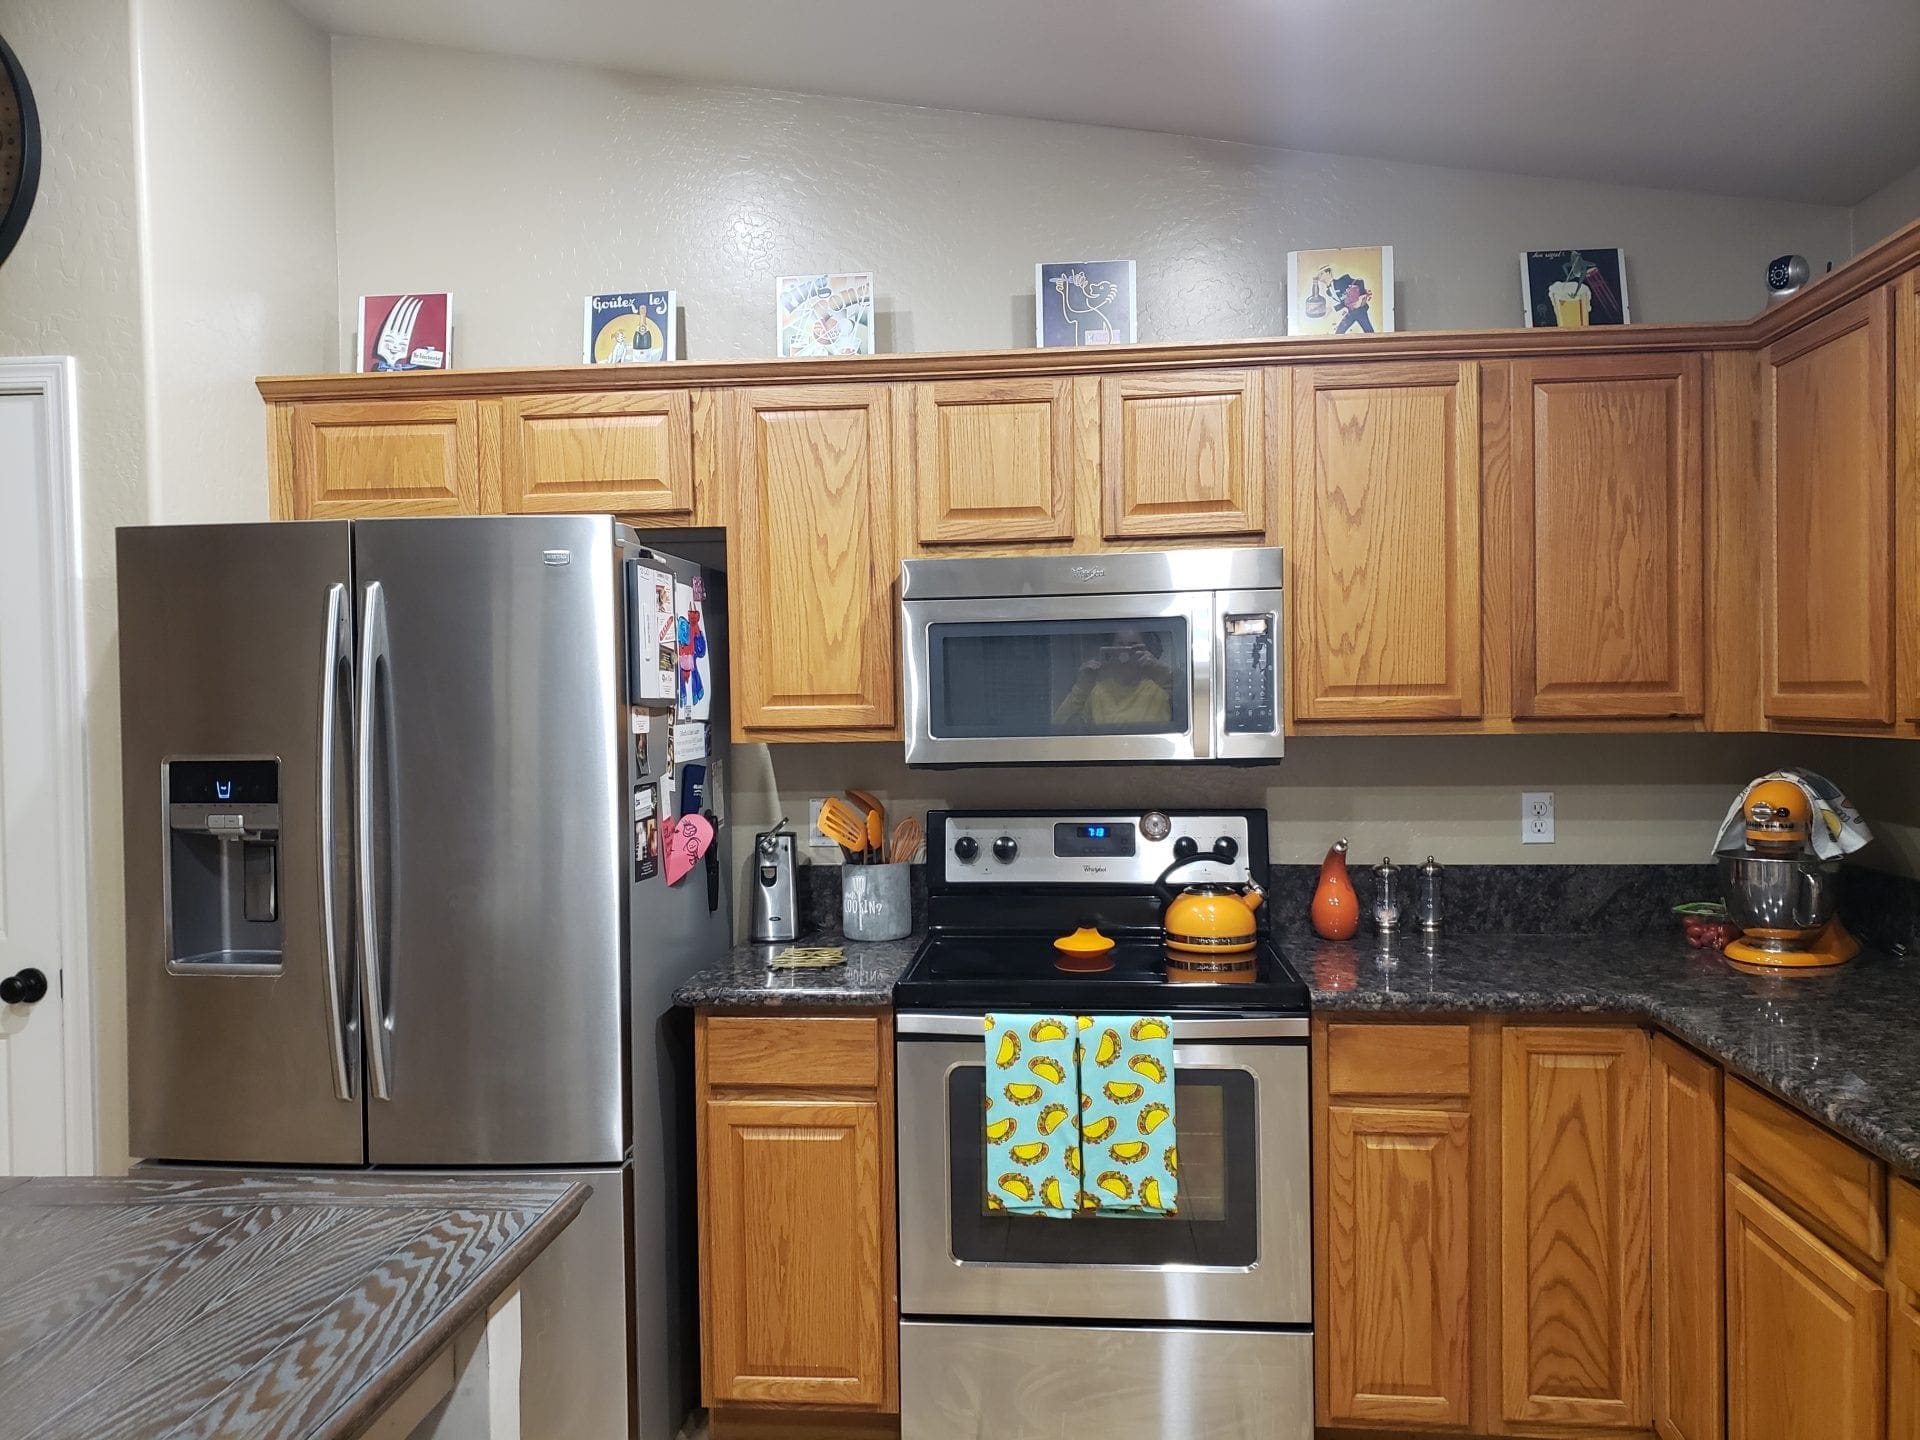 Arizona Painting Company offers Cabinet Painting: Newly painted cabinets bring a fresh and stylish transformation to any space. Old brown cabinets before being painted.